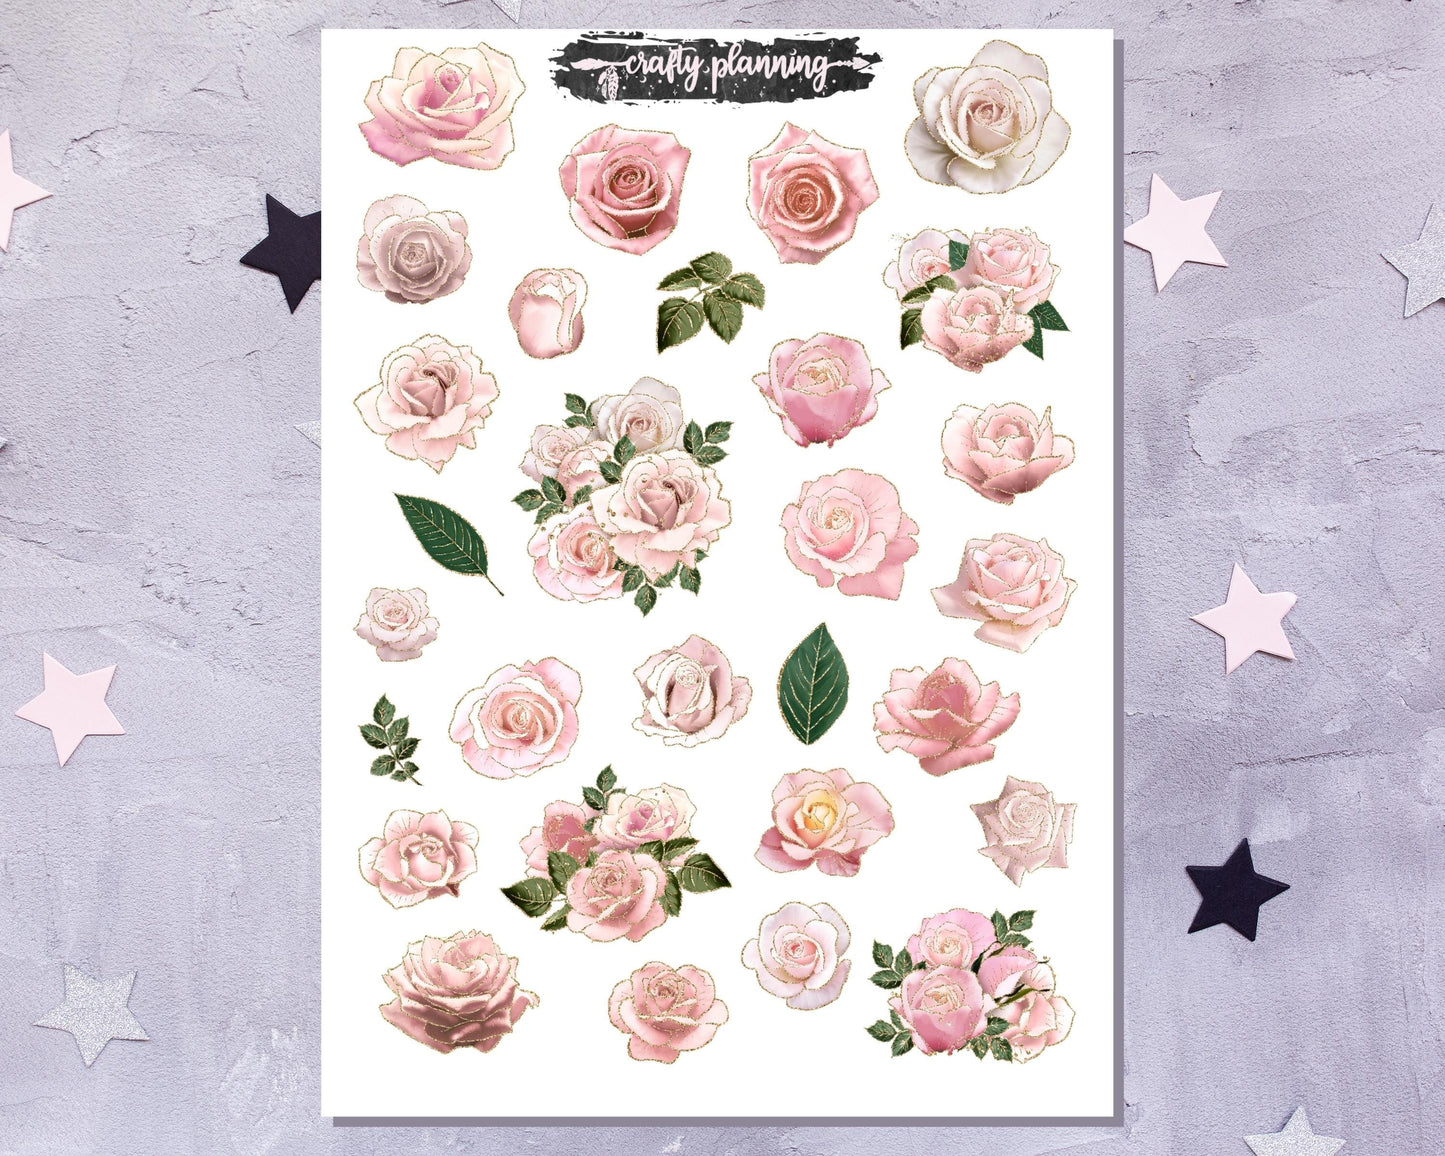 Rose Stickers, Floral Stickers, Deco Sticker Sheet, Planner Stickers, Journal Stickers, Decoration stickers, Planner Deco